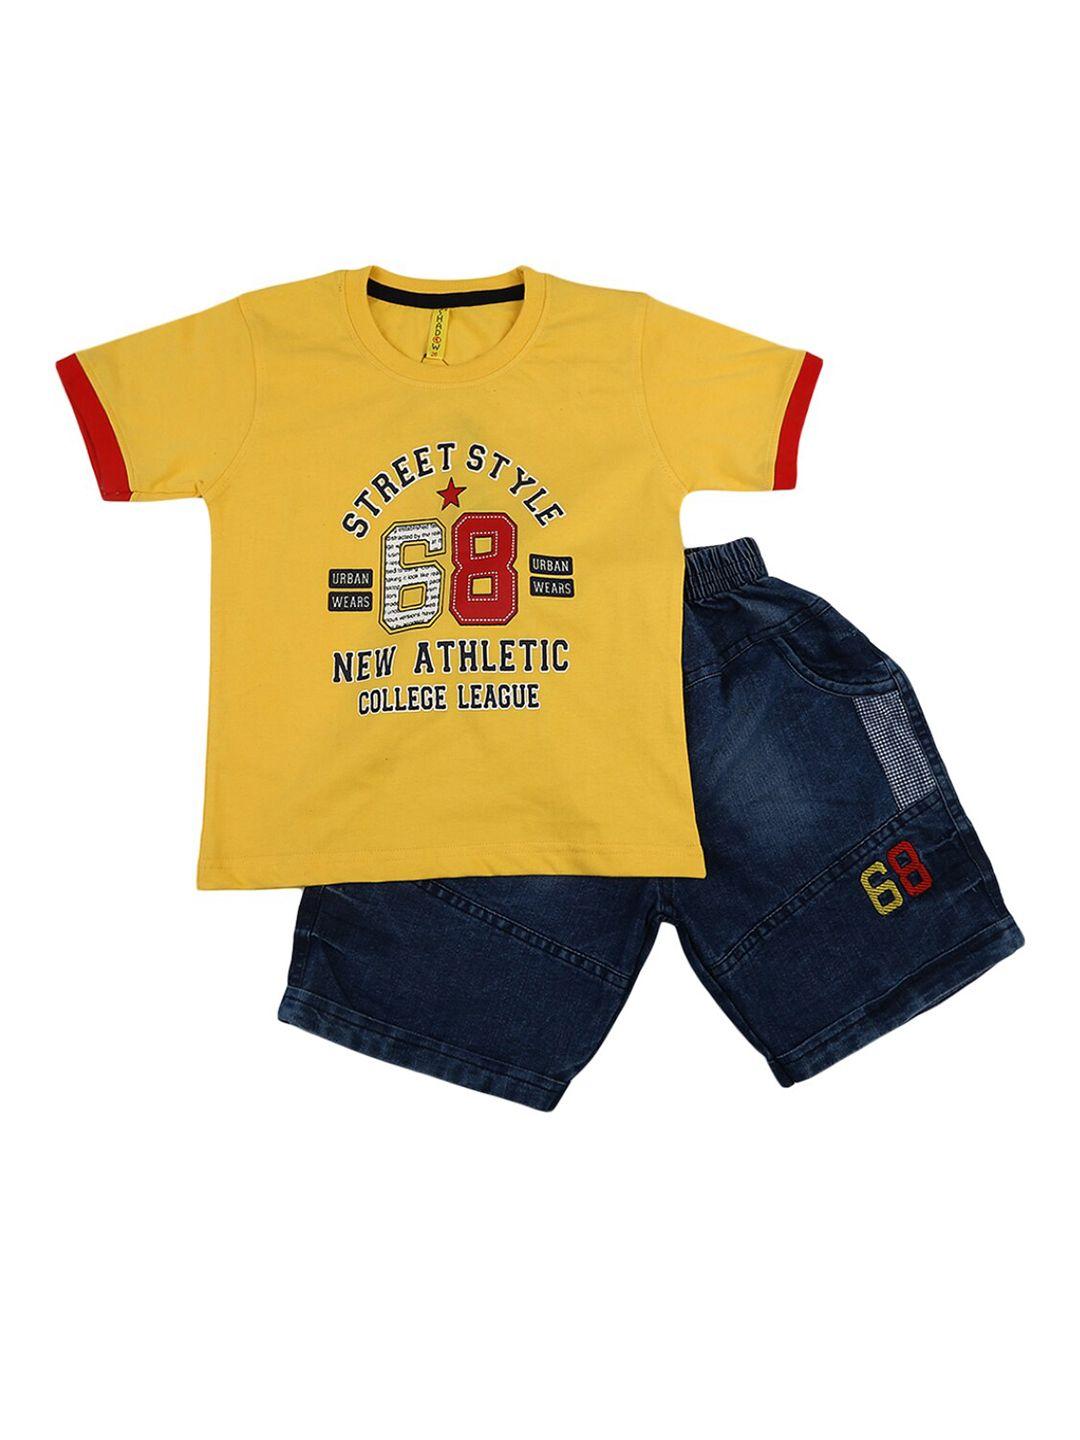 v-mart uisex kids yellow & blue printed t-shirt with shorts